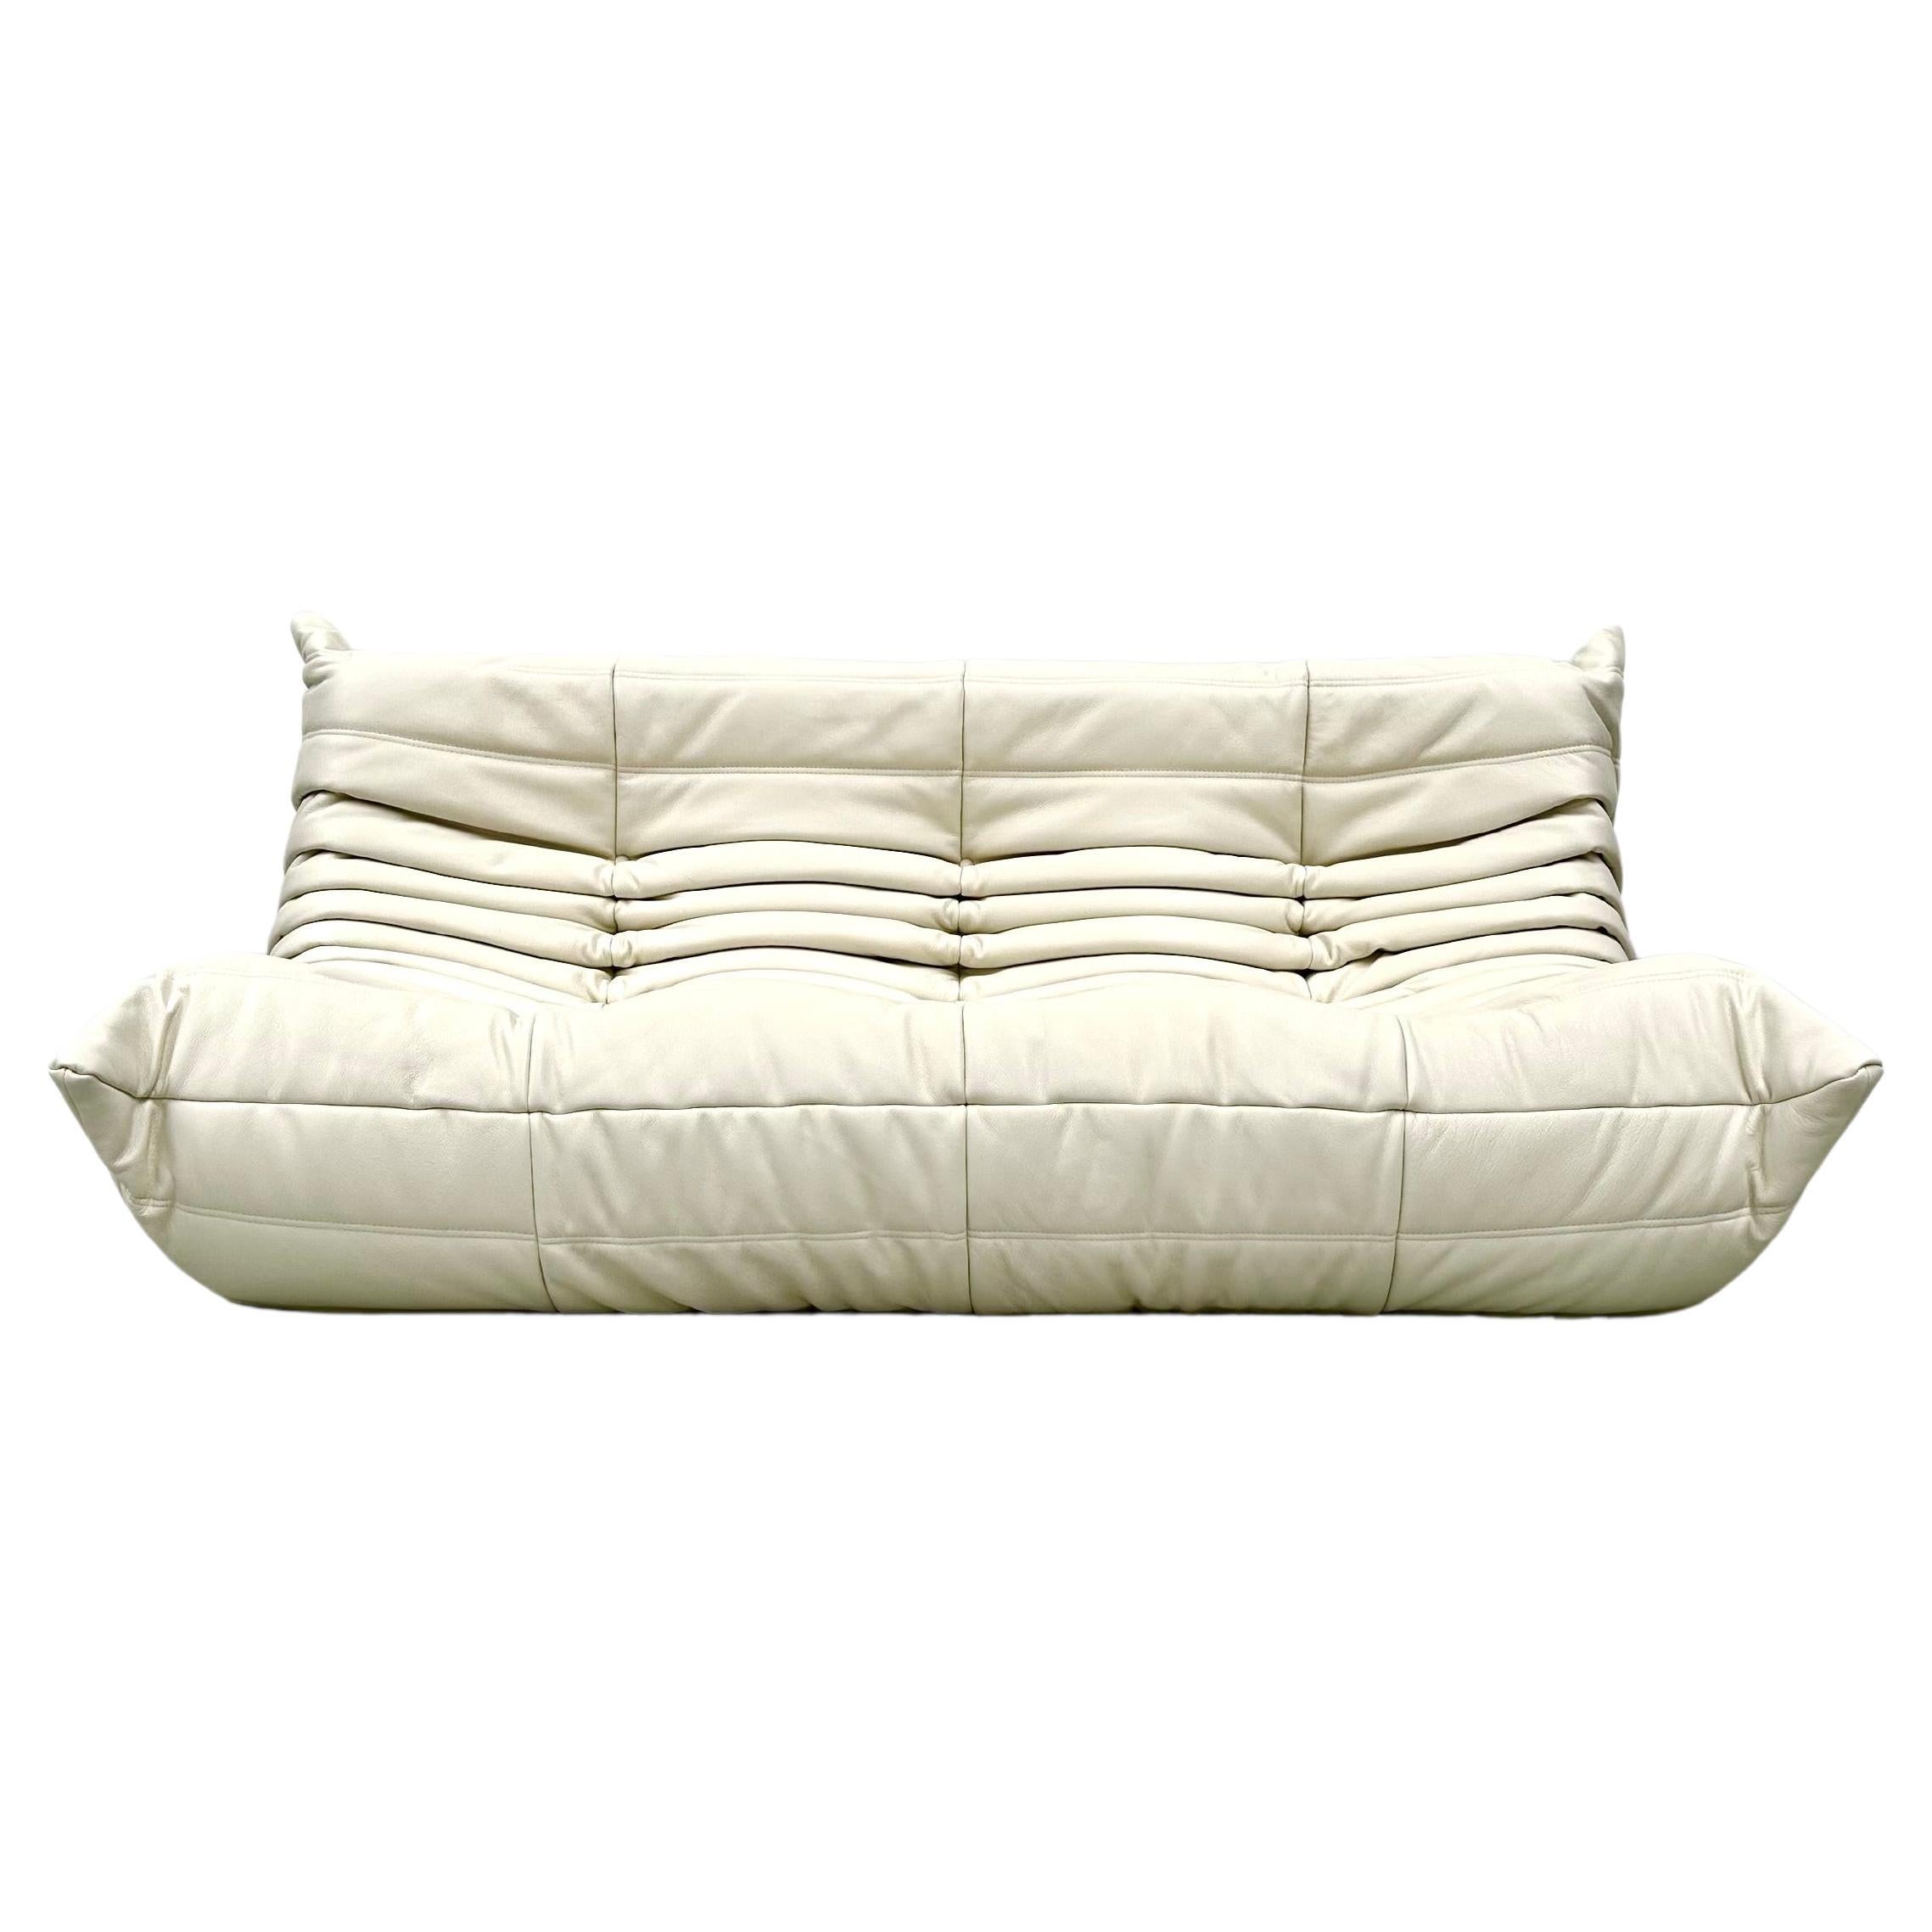 French Vintage Togo Sofa in White Leather by Michel Ducaroy for Ligne Roset.